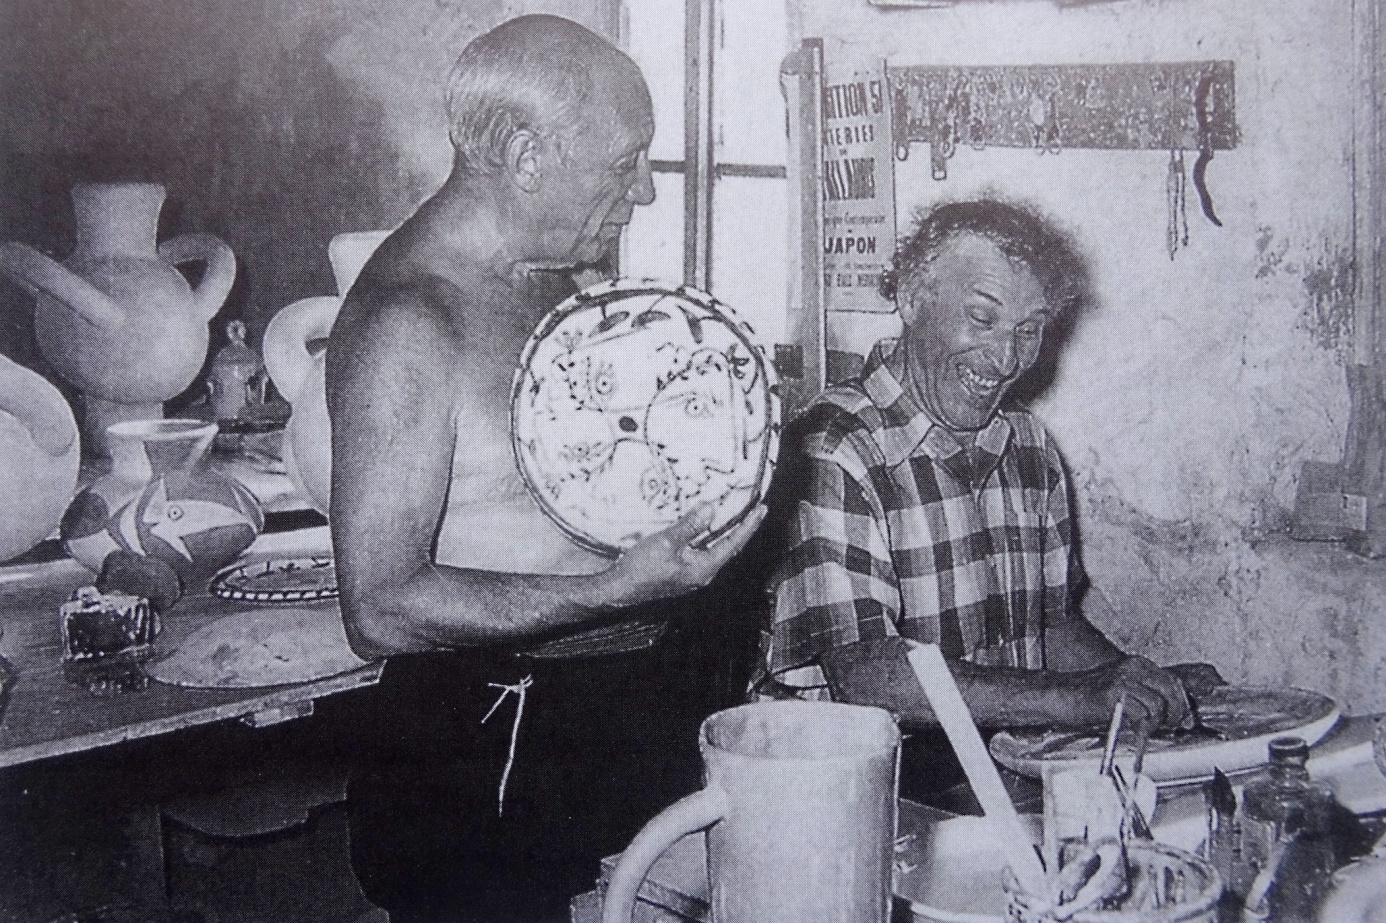 Picasso en Chagall